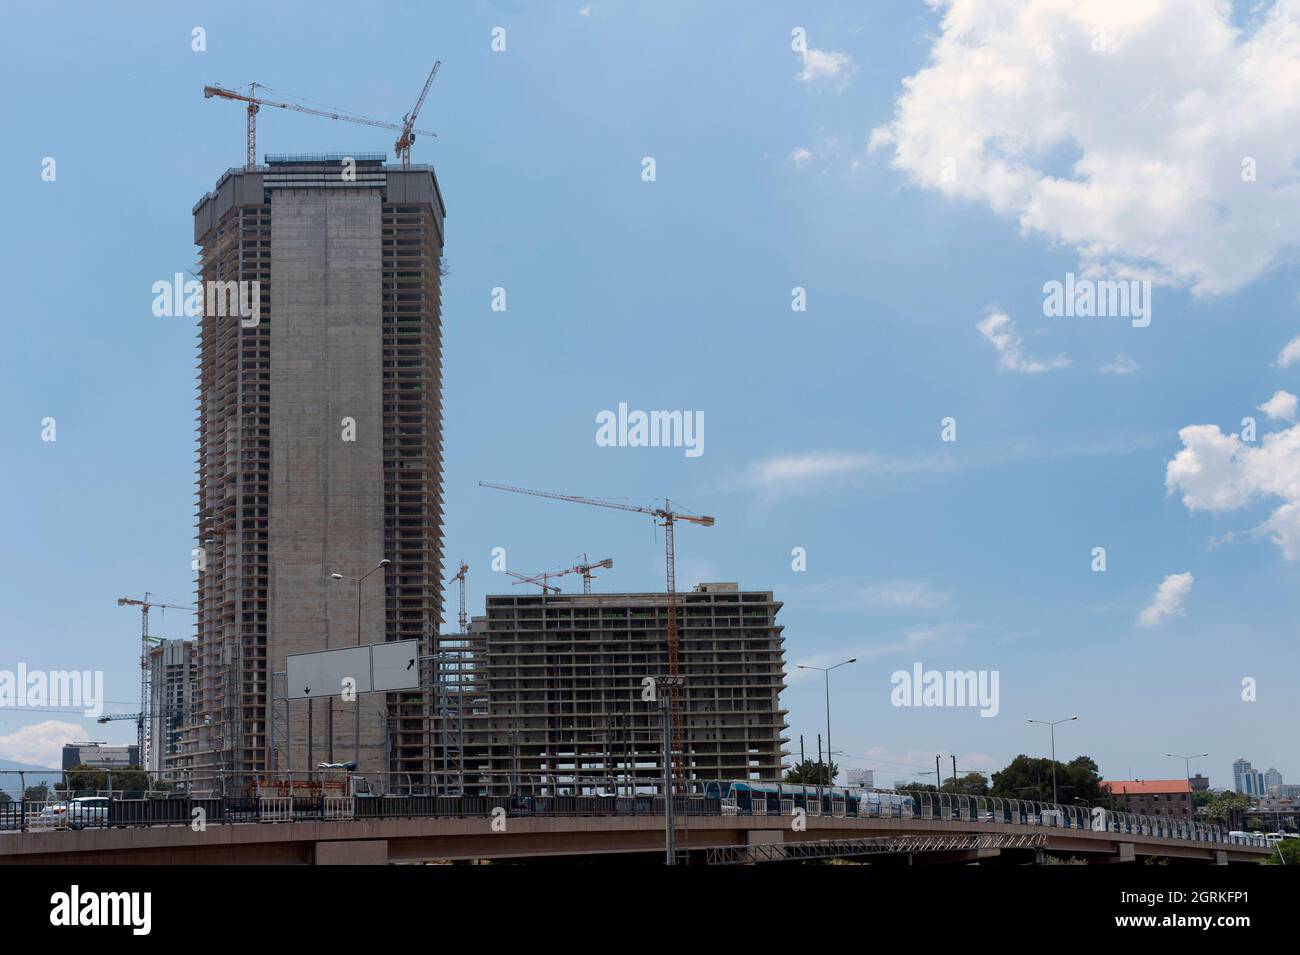 Tall building under construction in the city Stock Photo